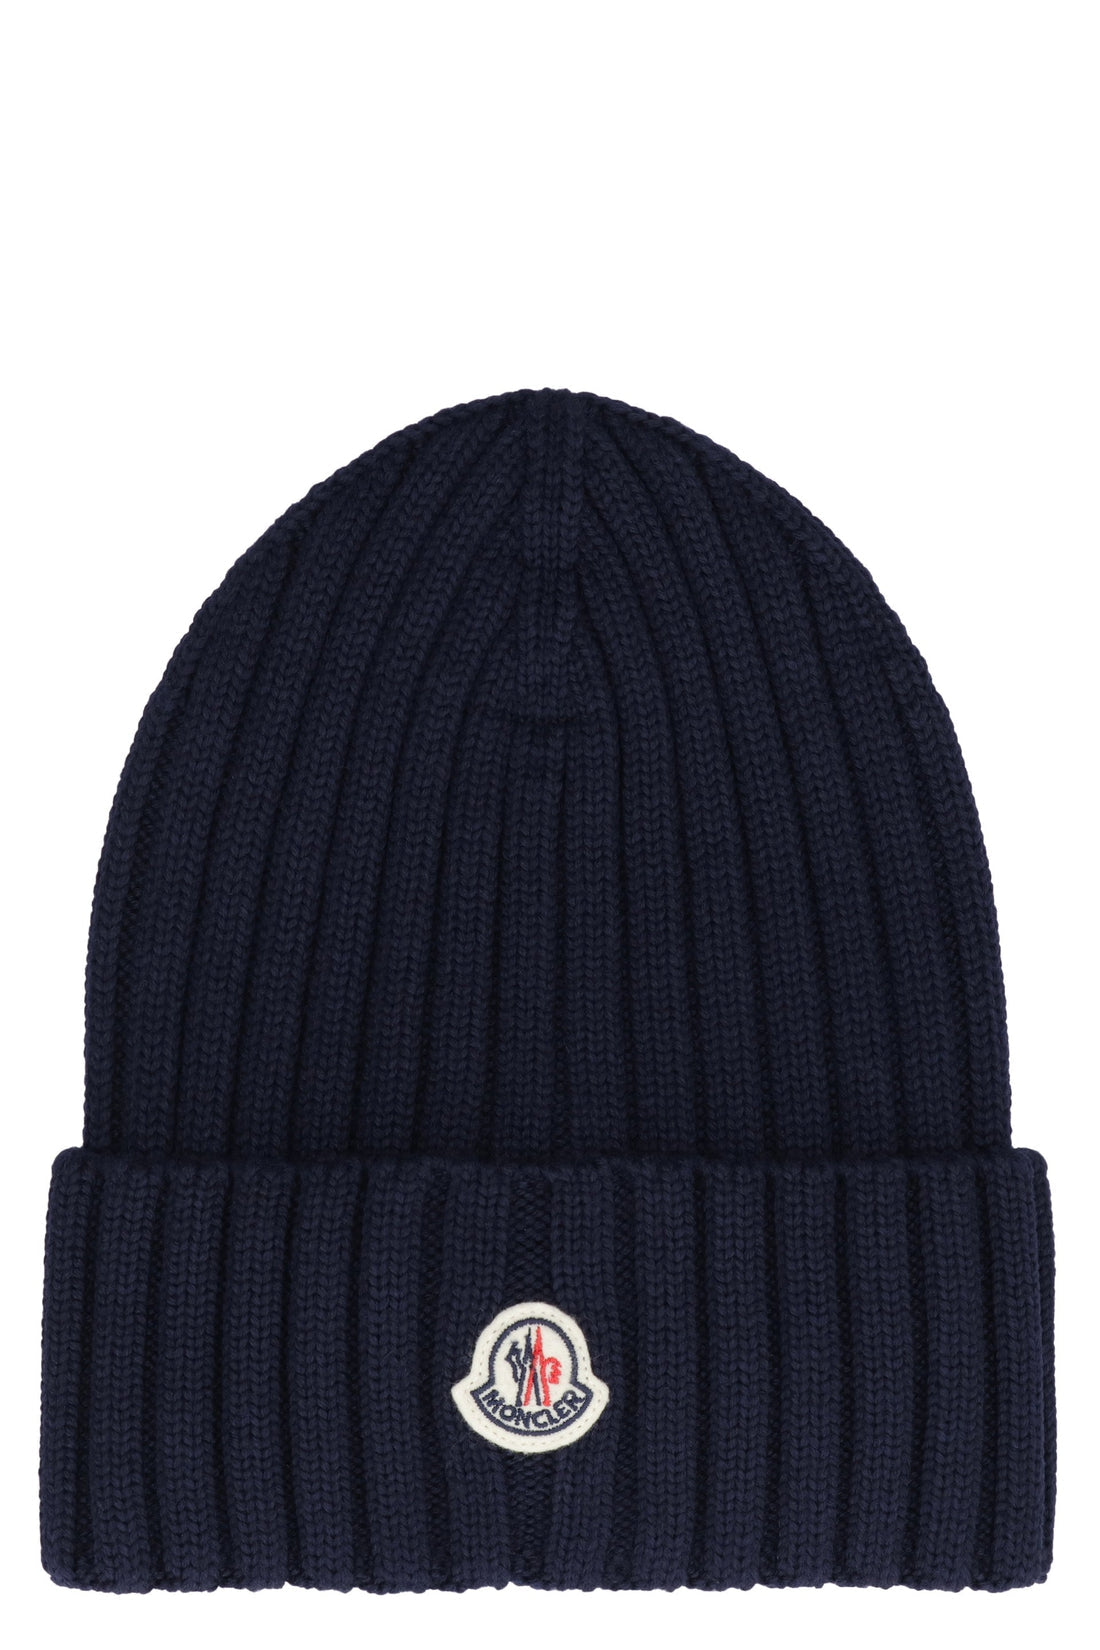 Moncler Grenoble-OUTLET-SALE-Knitted wool beanie hat-ARCHIVIST